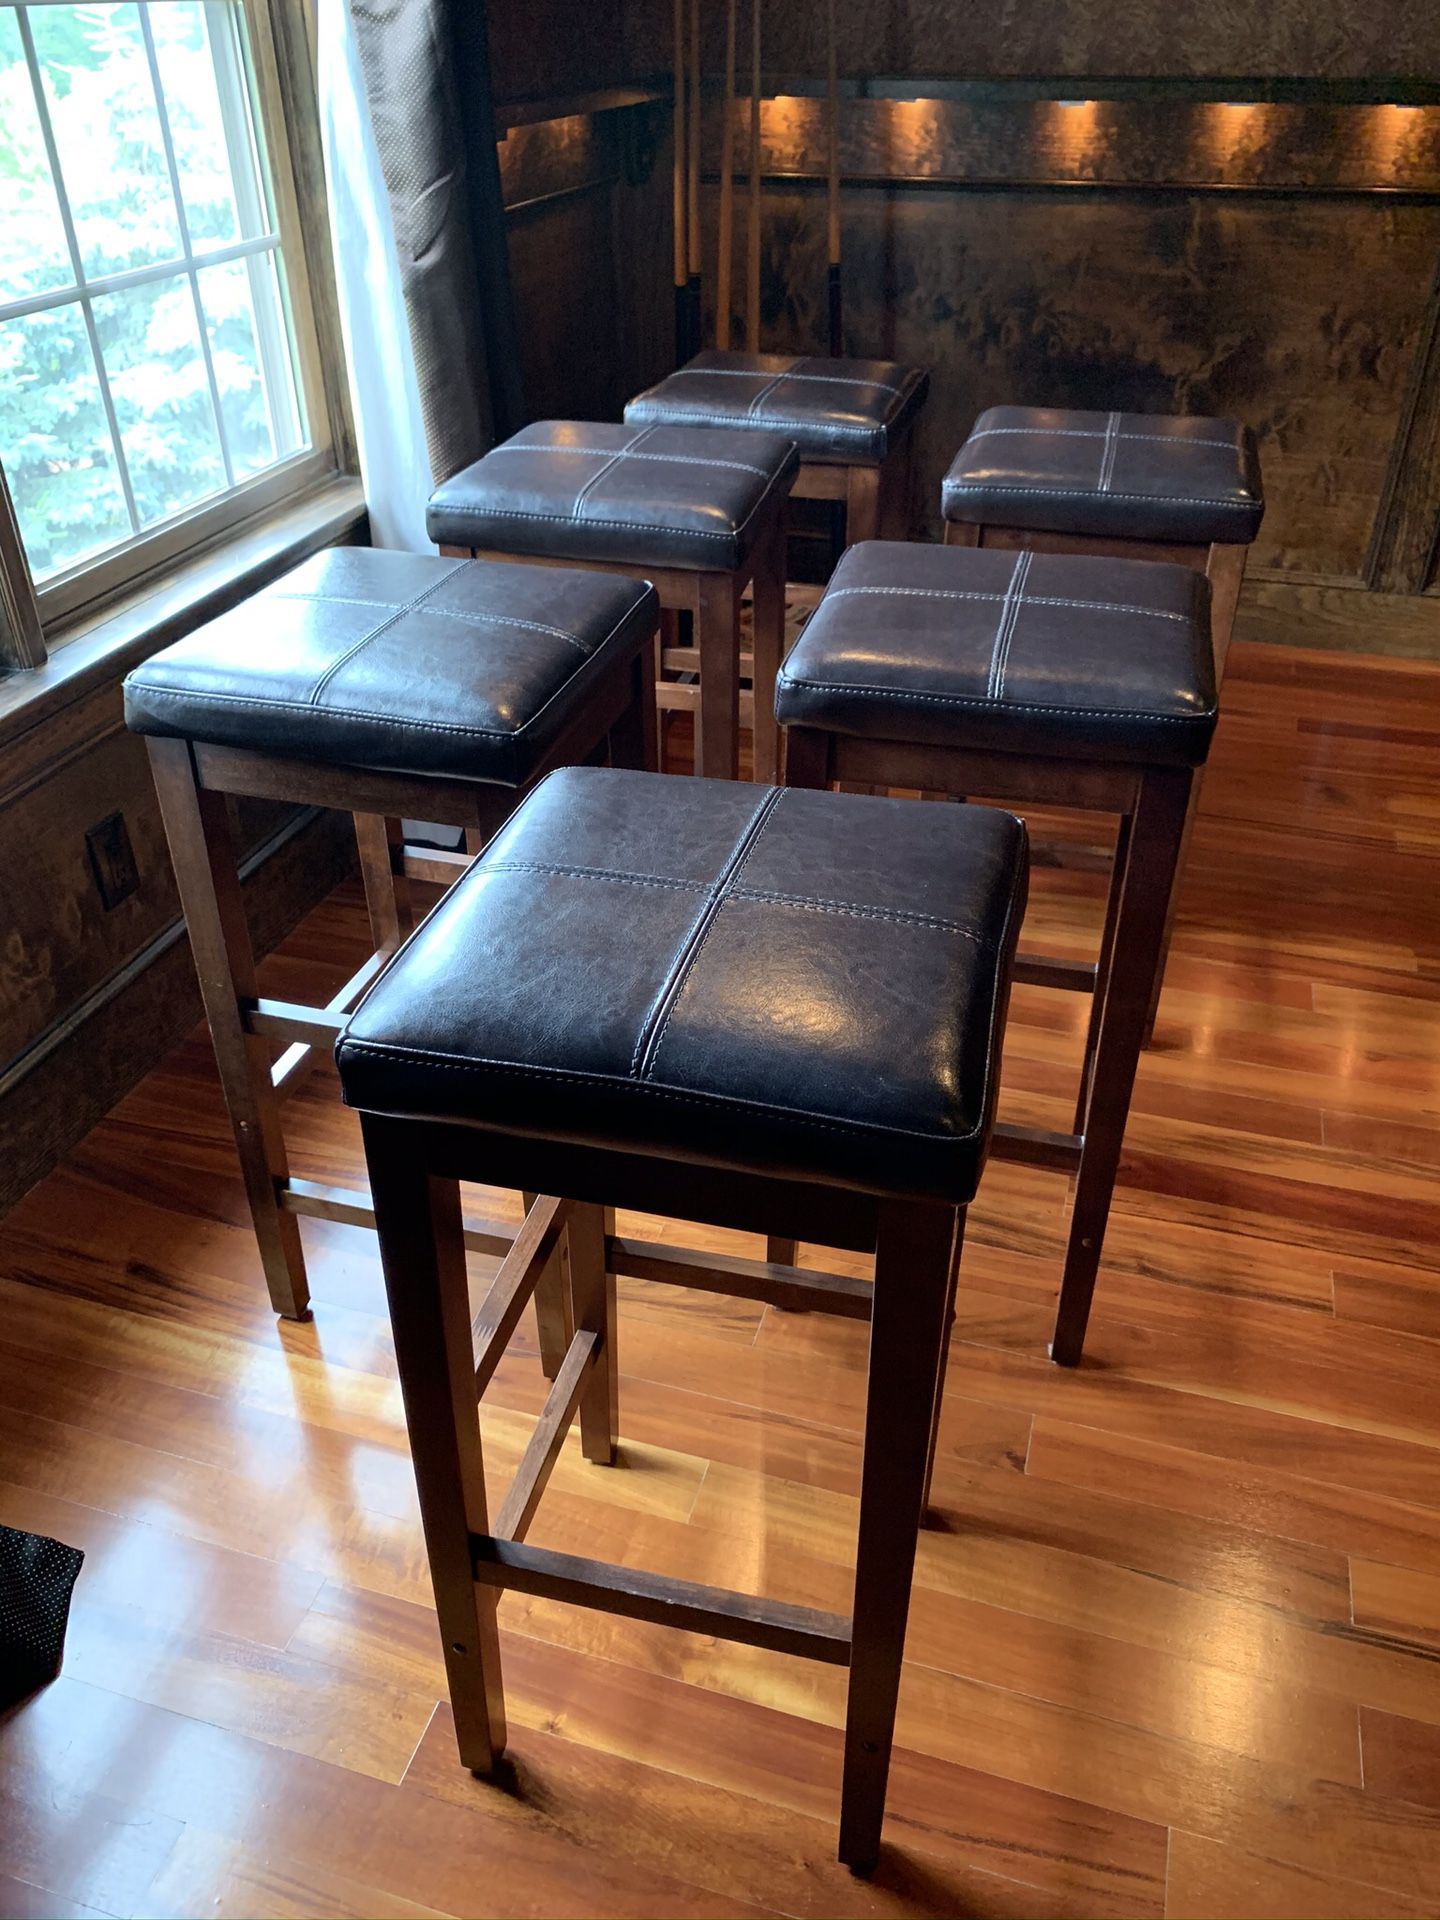 Stools with leather seats and wooden legs - ONLY 2 LEFT!!